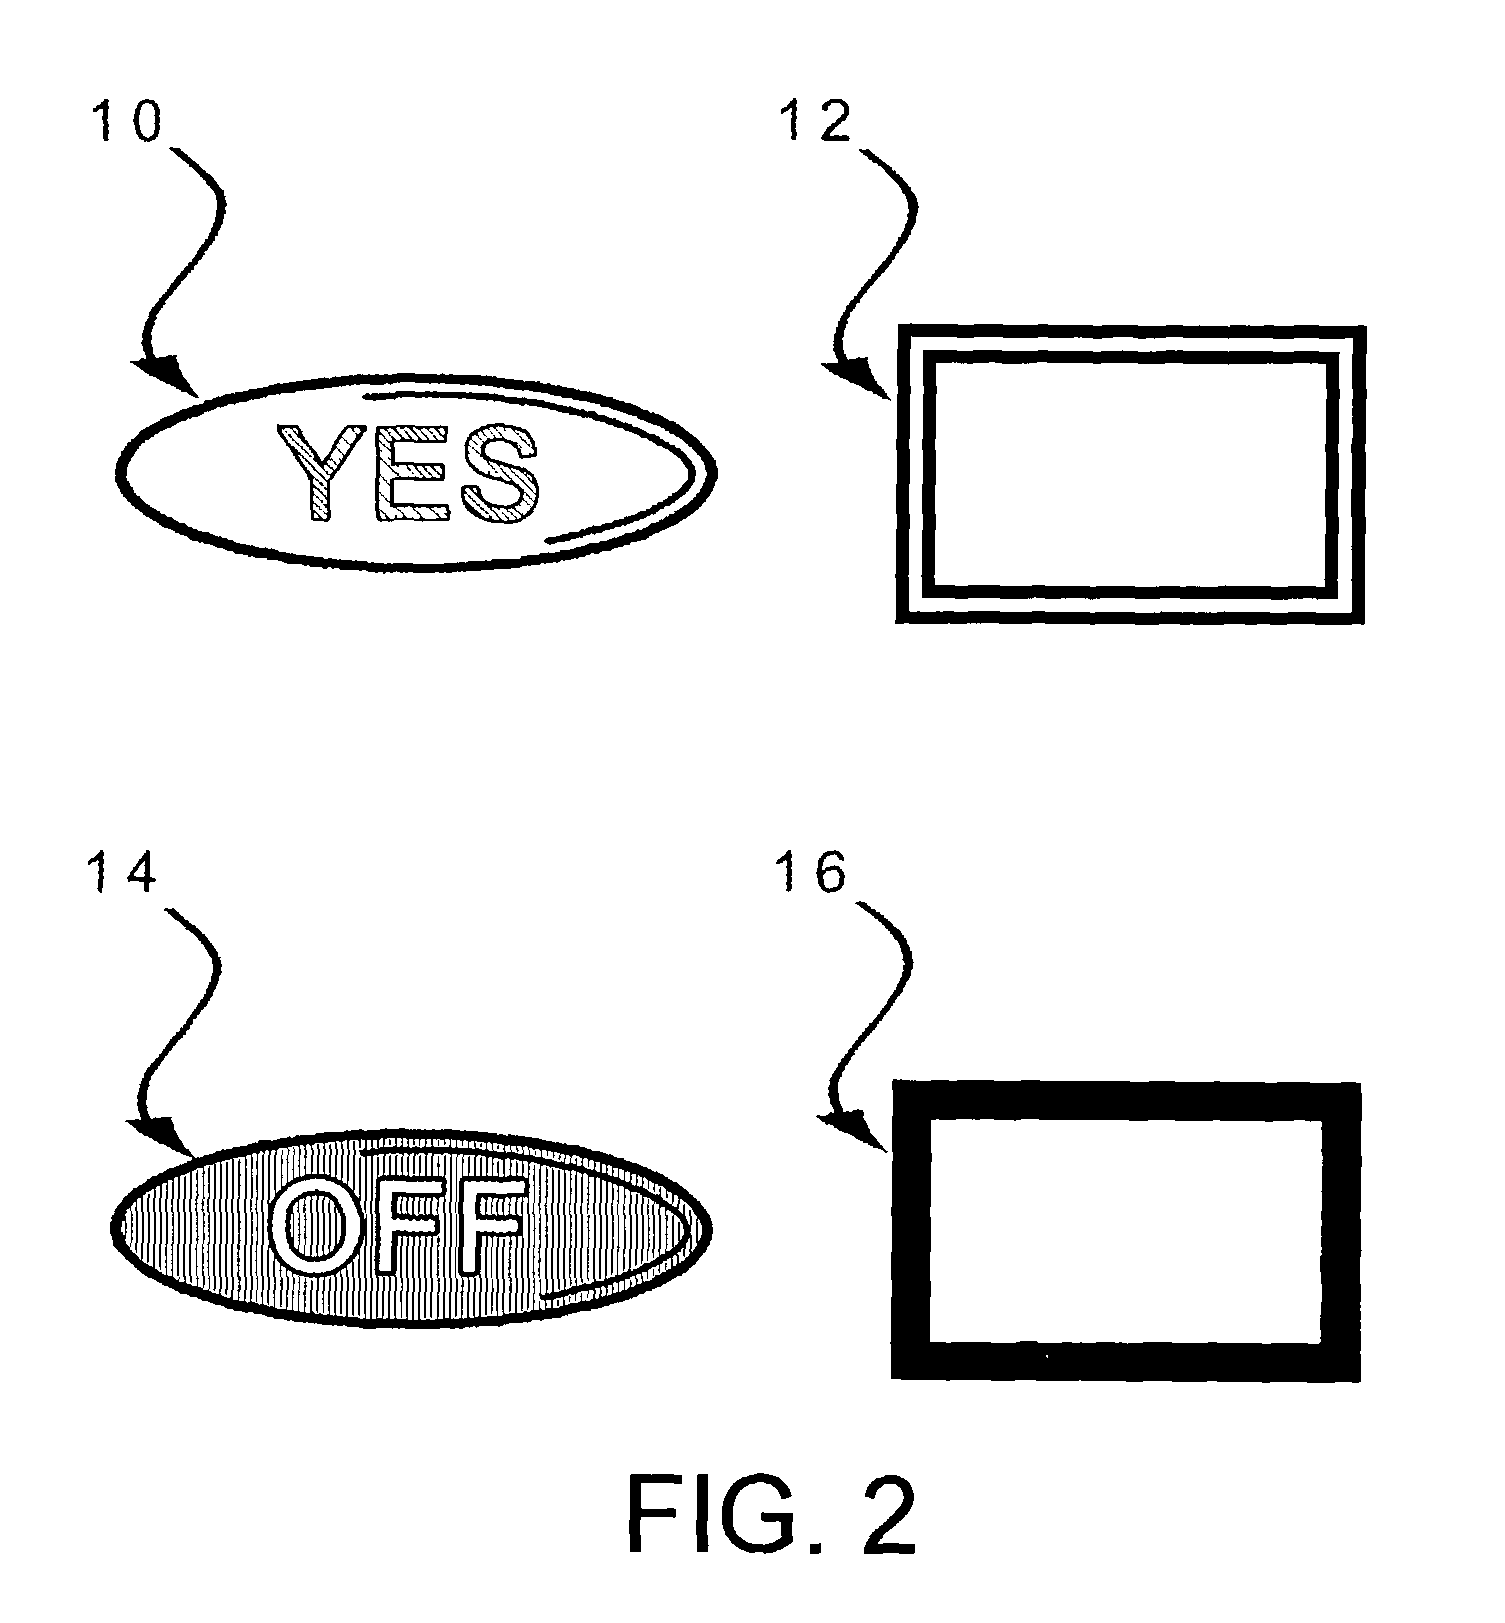 User interface for sedation and analgesia delivery systems and methods